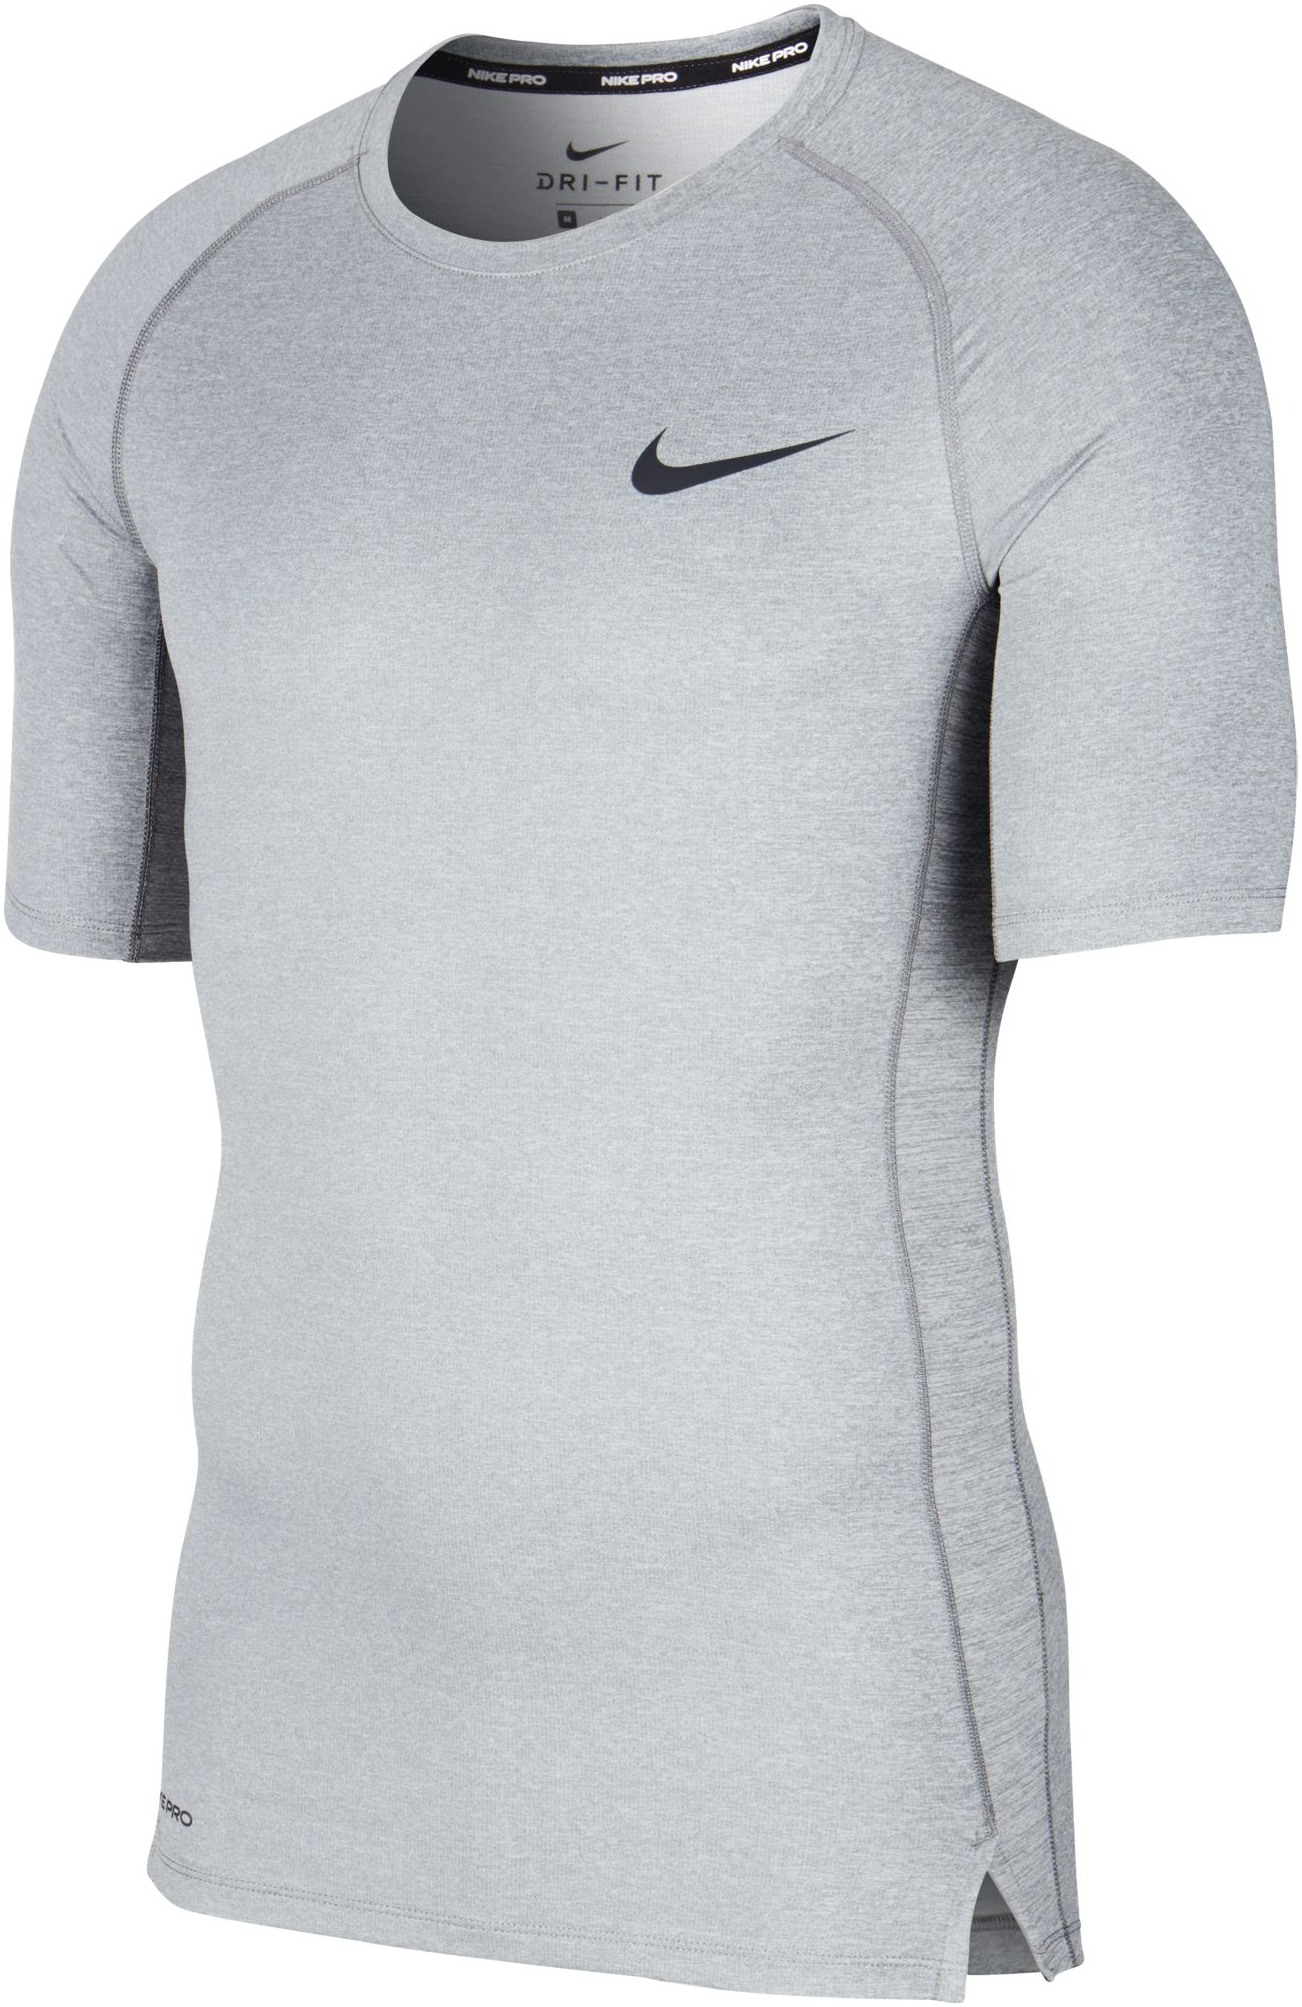 Centralisere Fearless Aubergine Mens compression short sleeve shirt Nike PRO grey | AD Sport.store